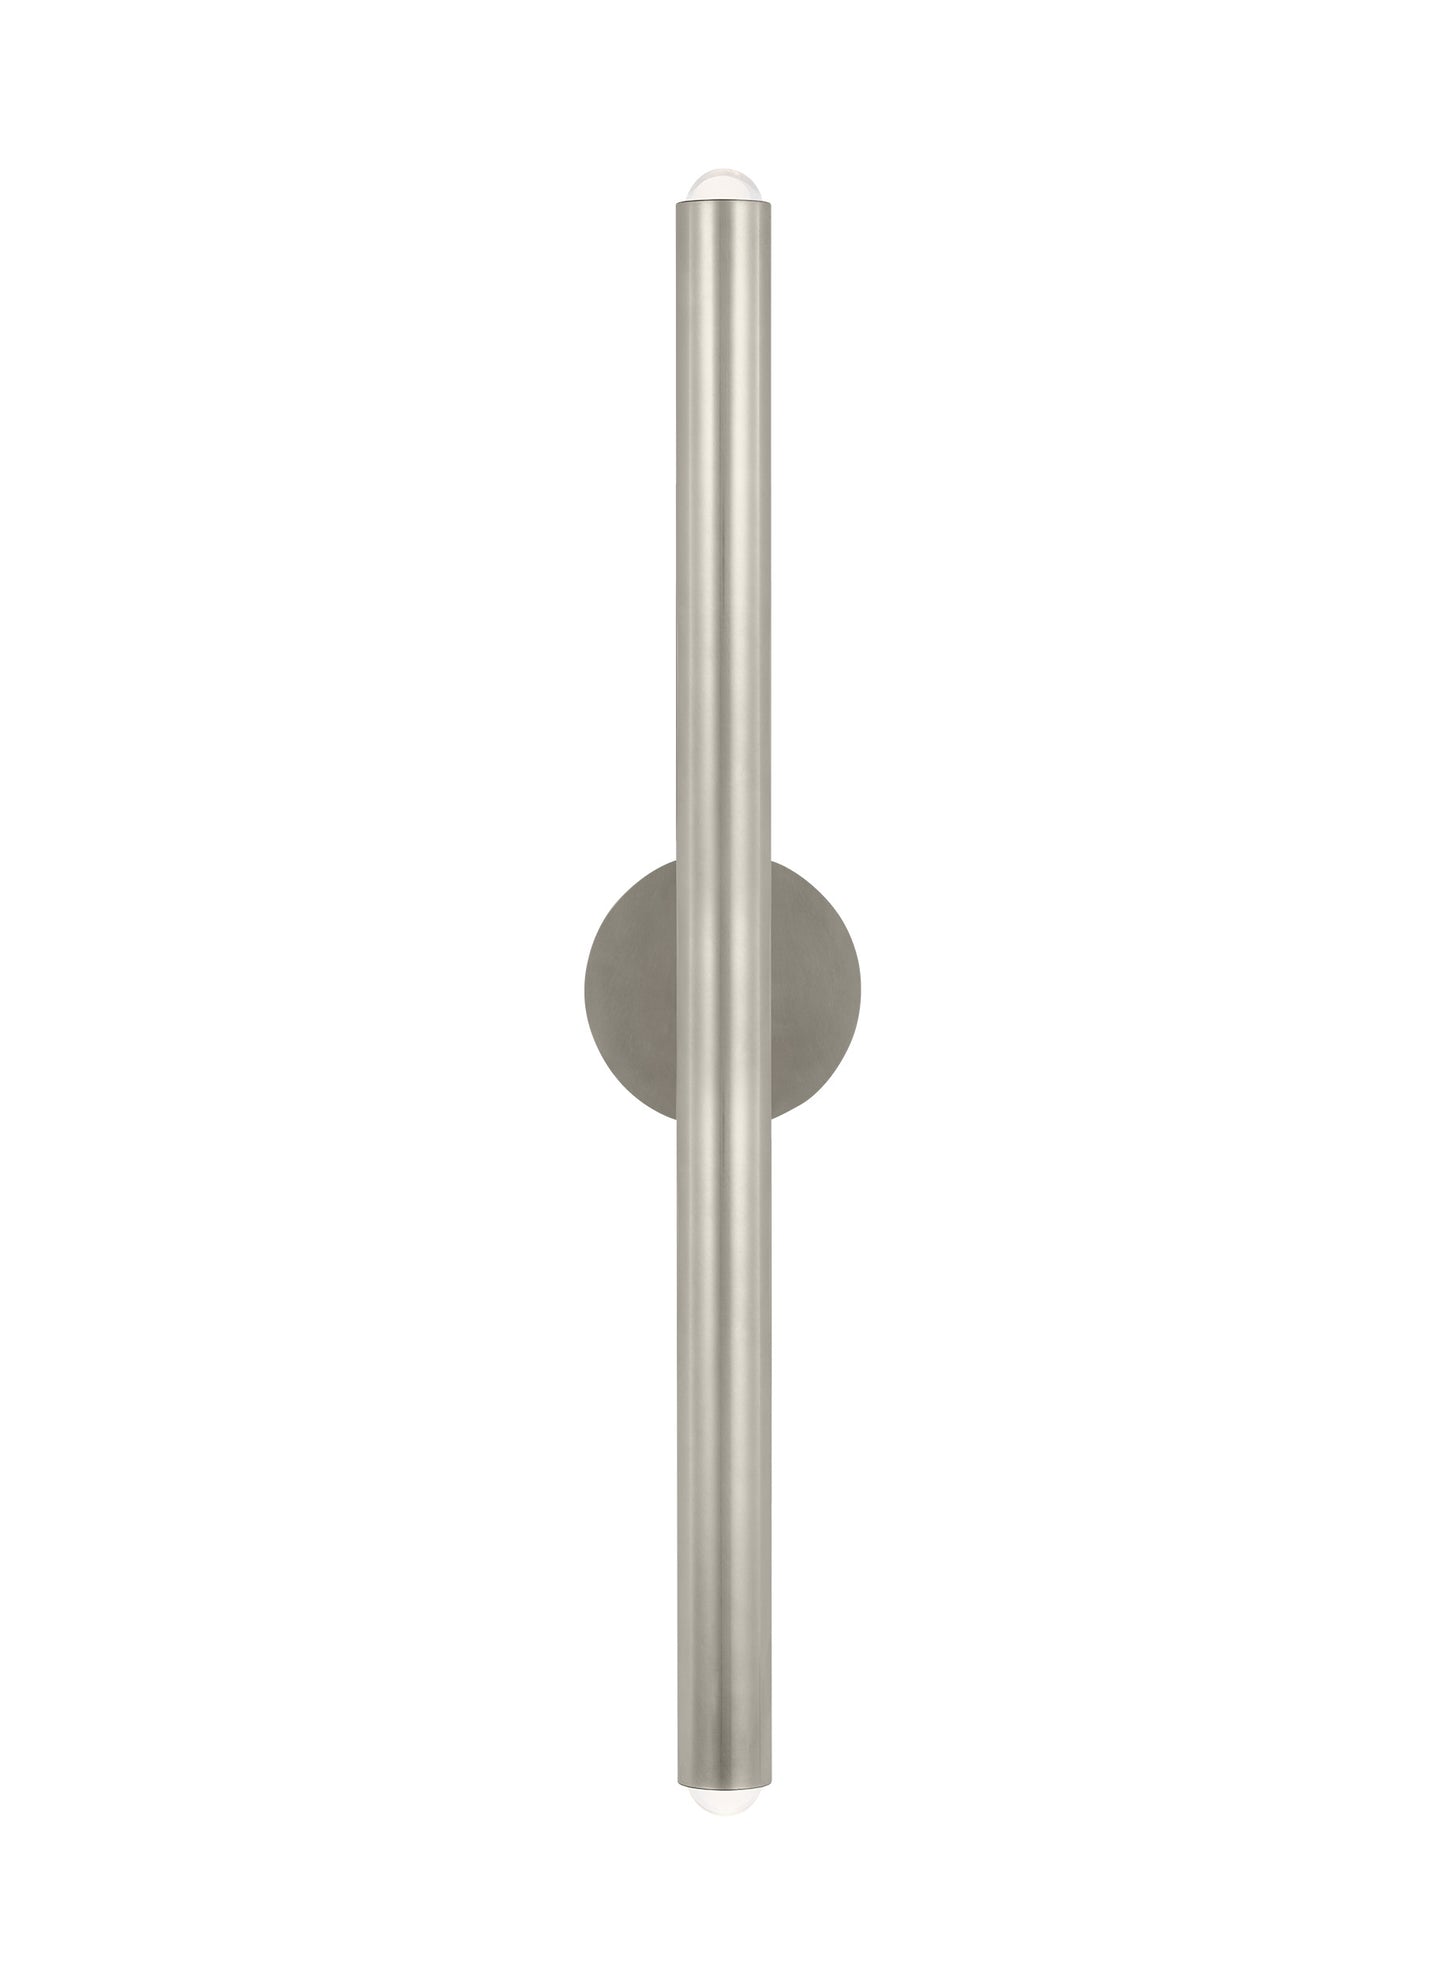 Ebell Wall Sconce - Large | Visual Comfort Modern